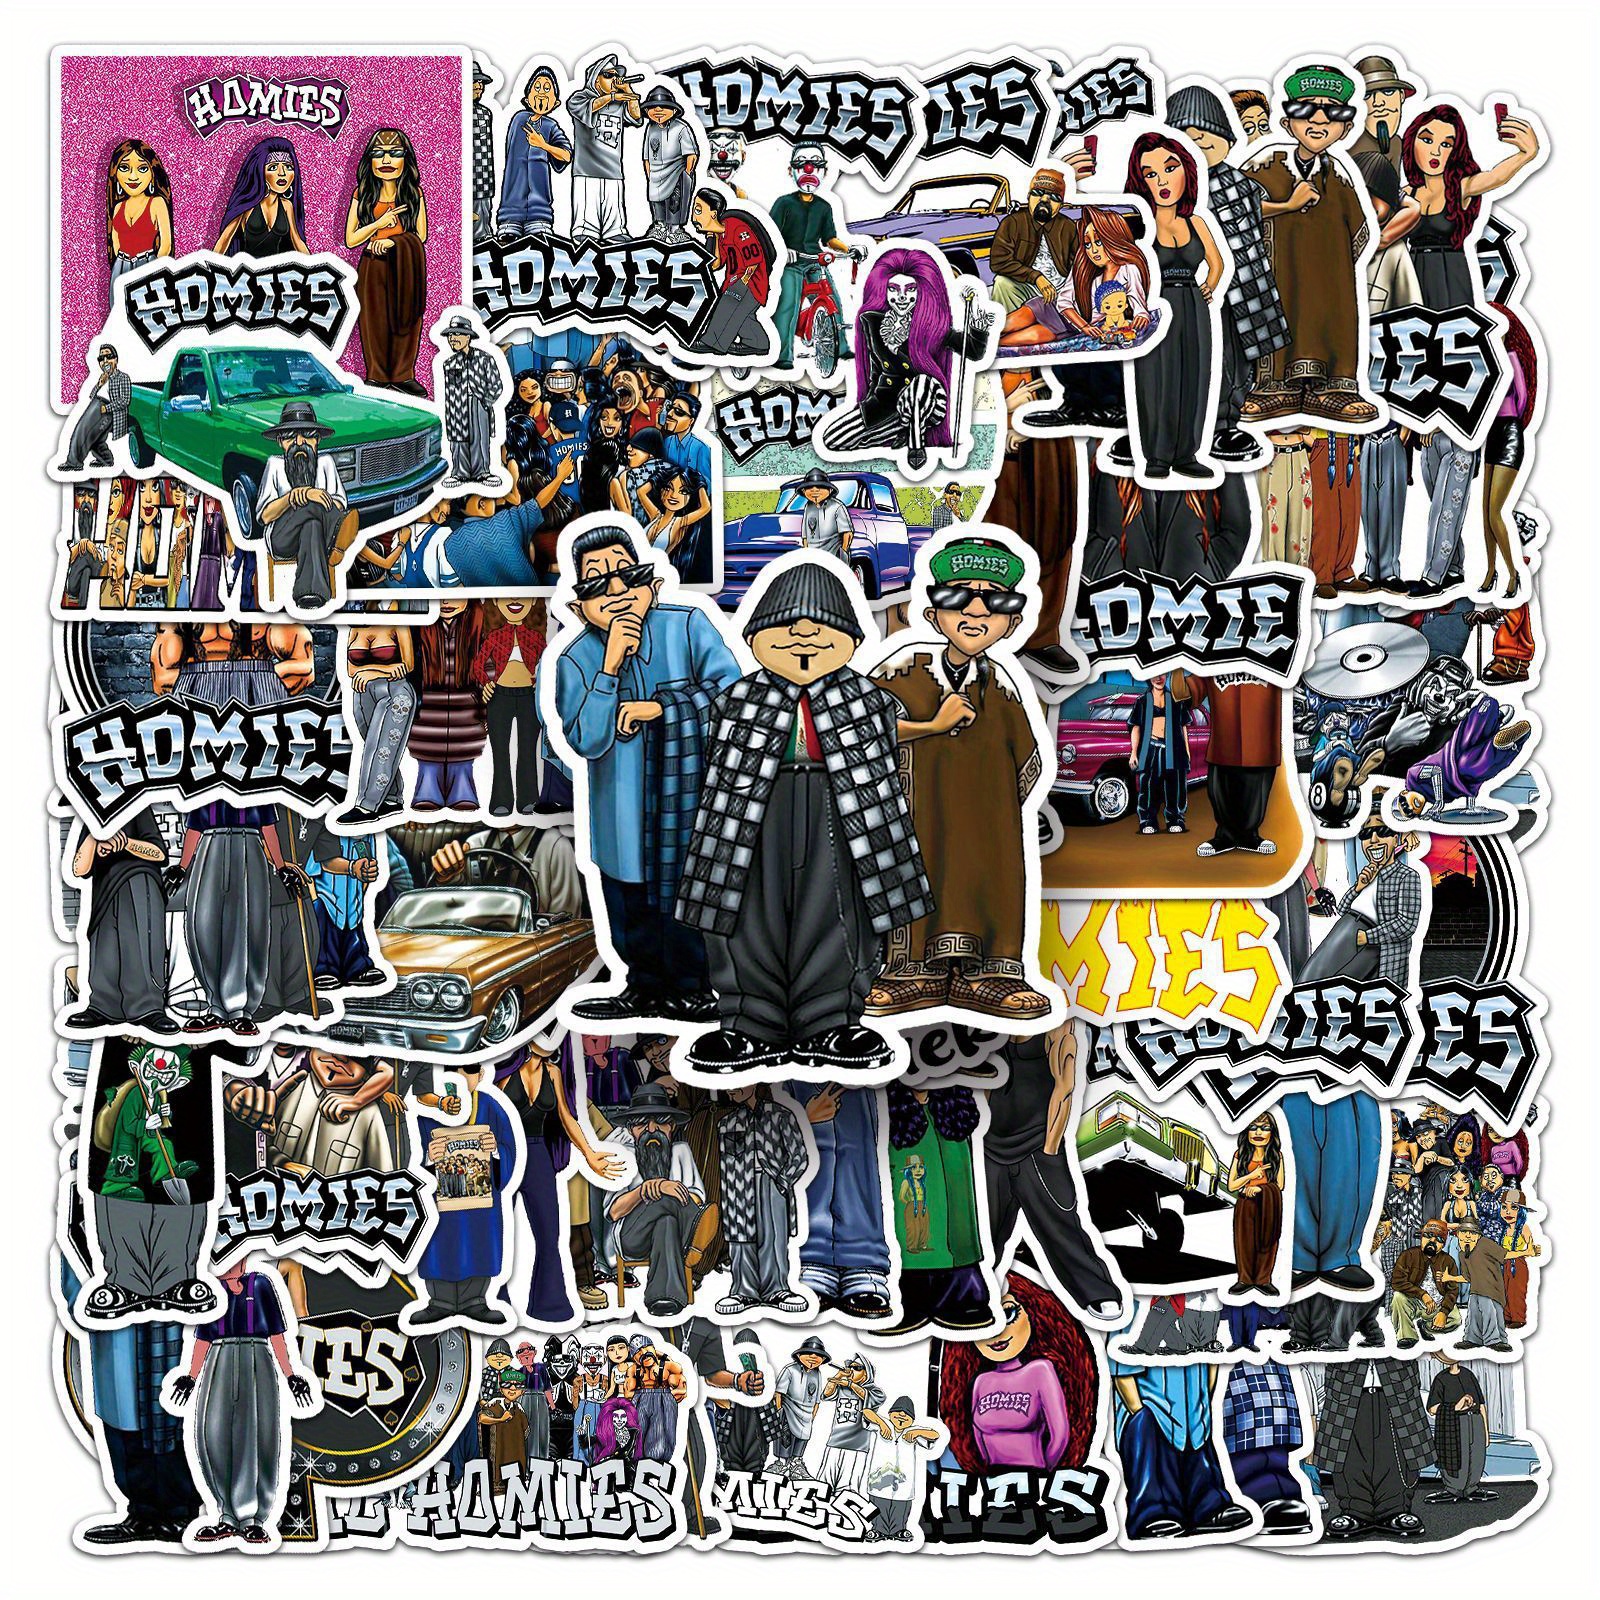  Popular Singer Stickers 50 Pcs, Vinyl Waterproof Stickers for Water  Bottles Laptop Phone Computer Guitar, Gifts for Teens, Girls, Fans :  Electronics